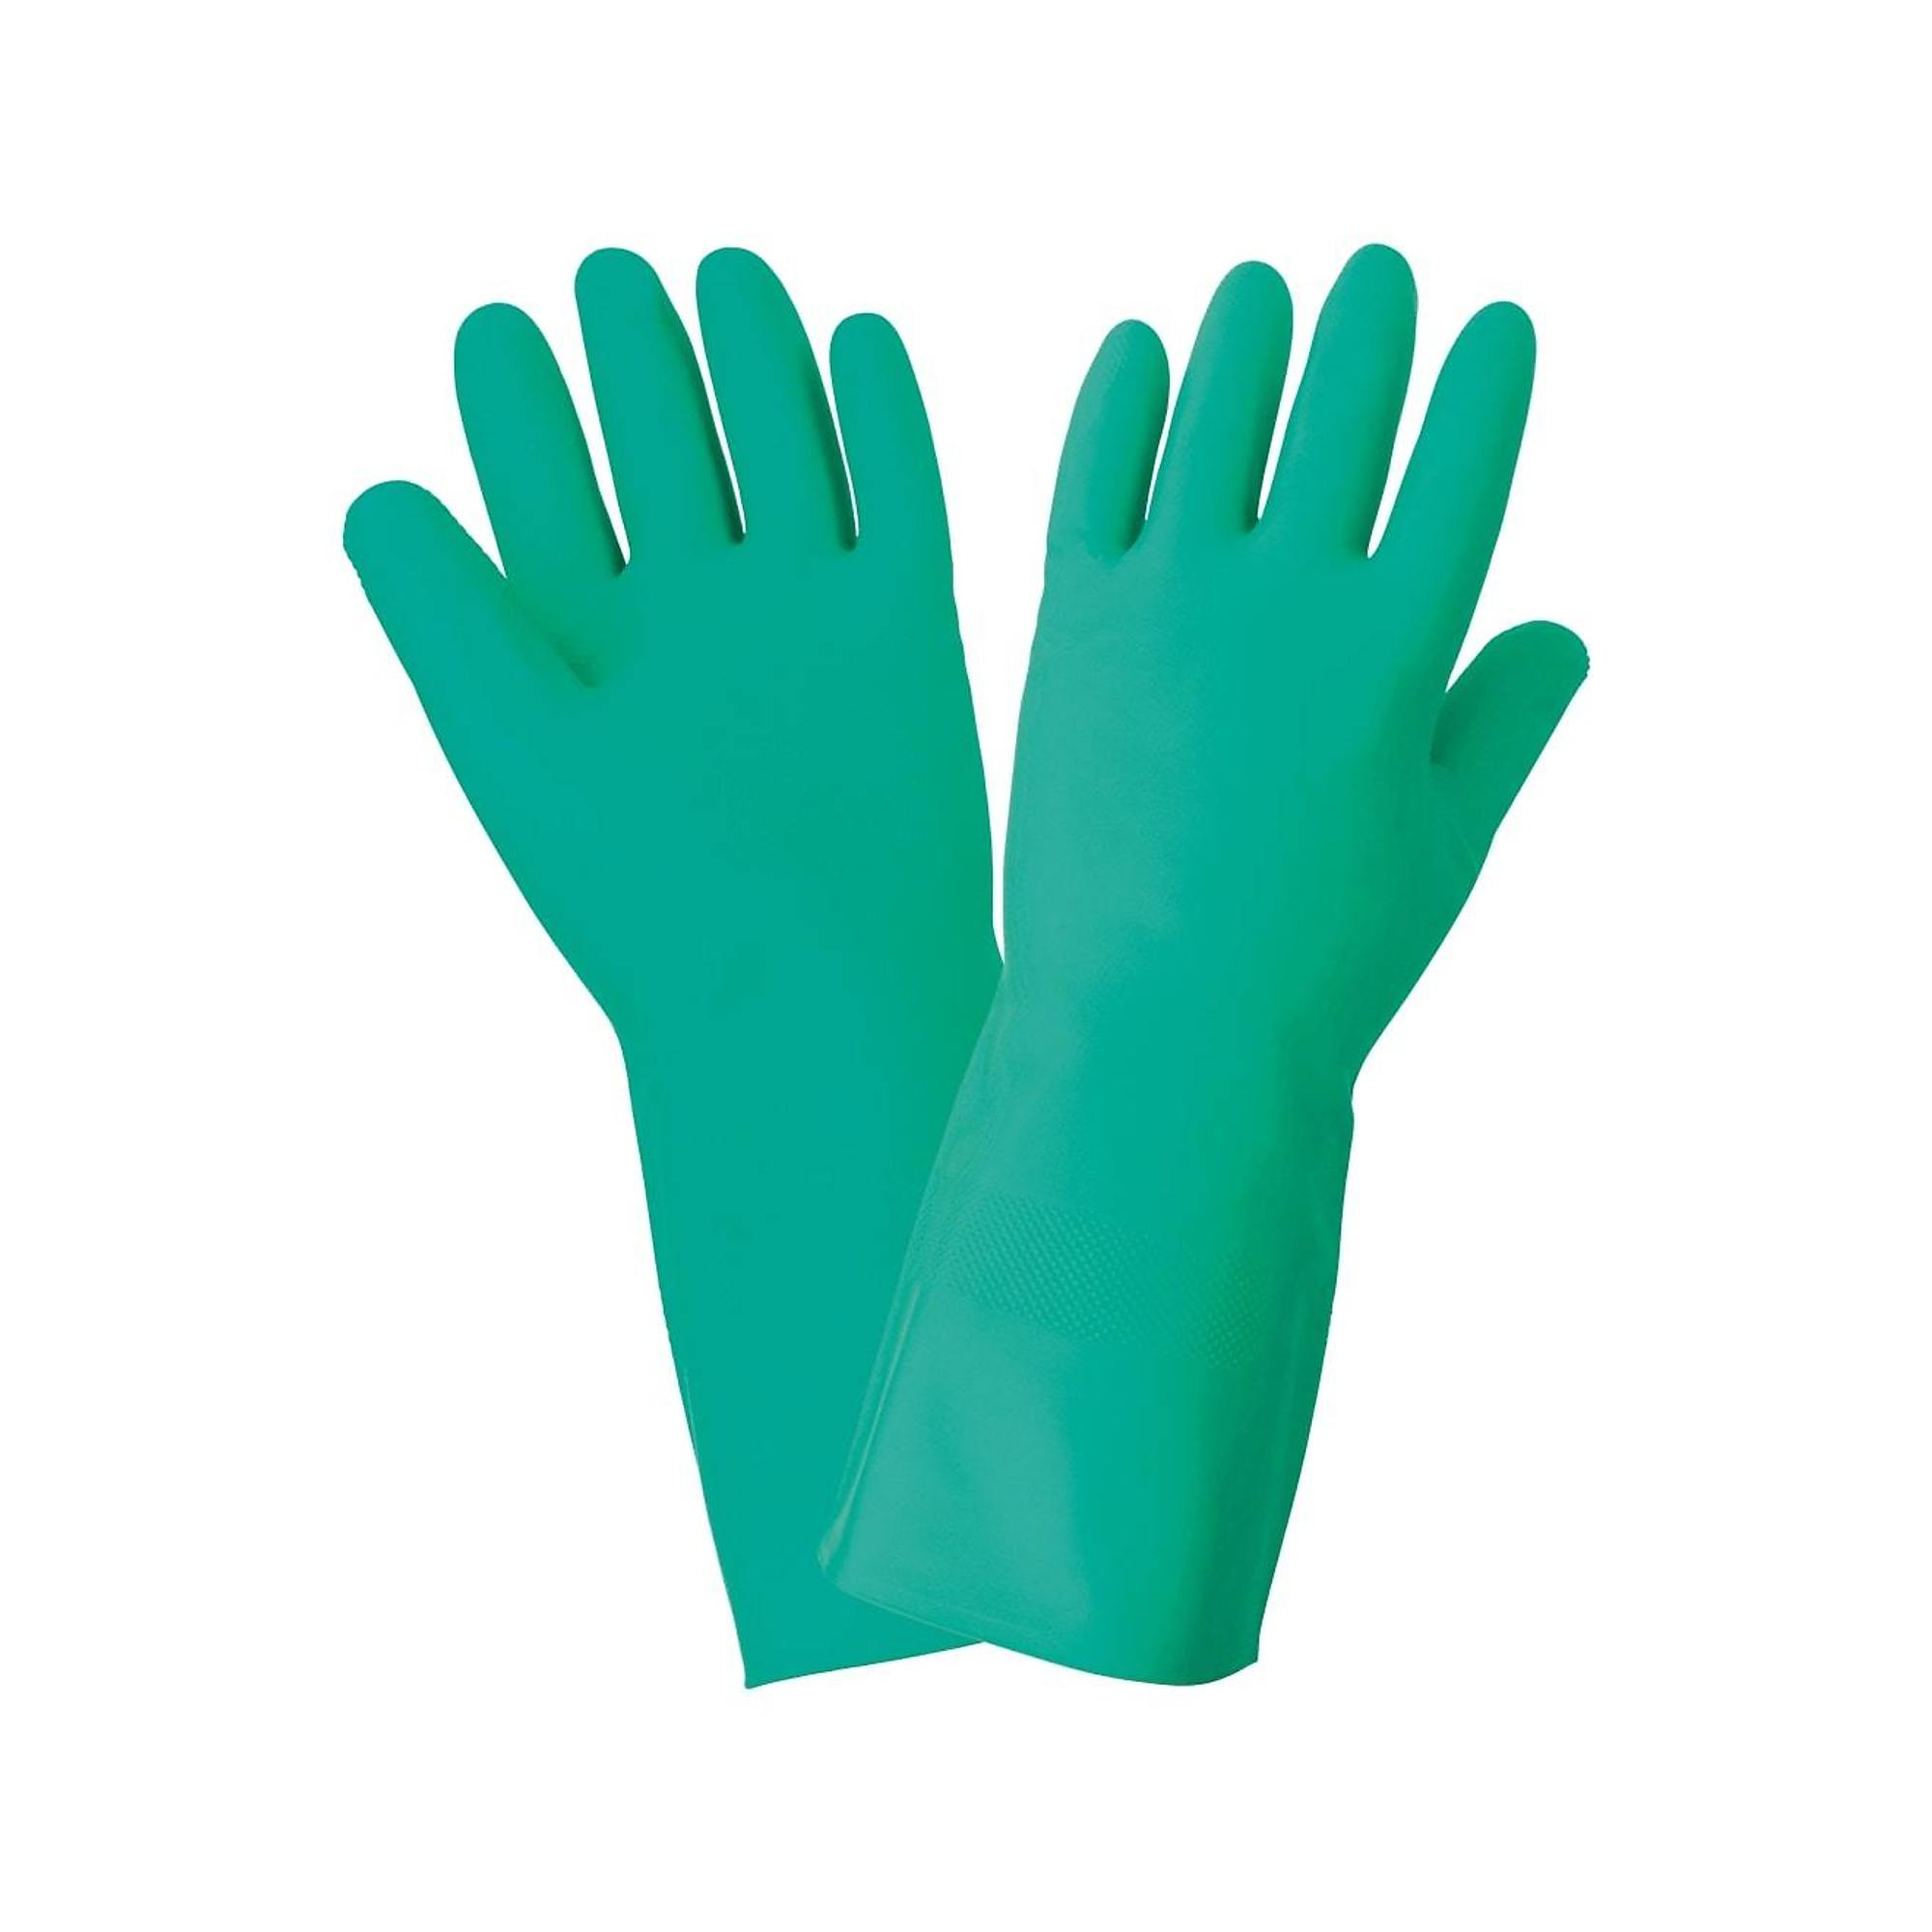 FrogWear, 12-Mil, 13Inch, Unlined, Nitrile Diamond Grip Gloves - 12 Pairs, Size M, Color Green, Included (qty.) 12 Model 515-8(M)